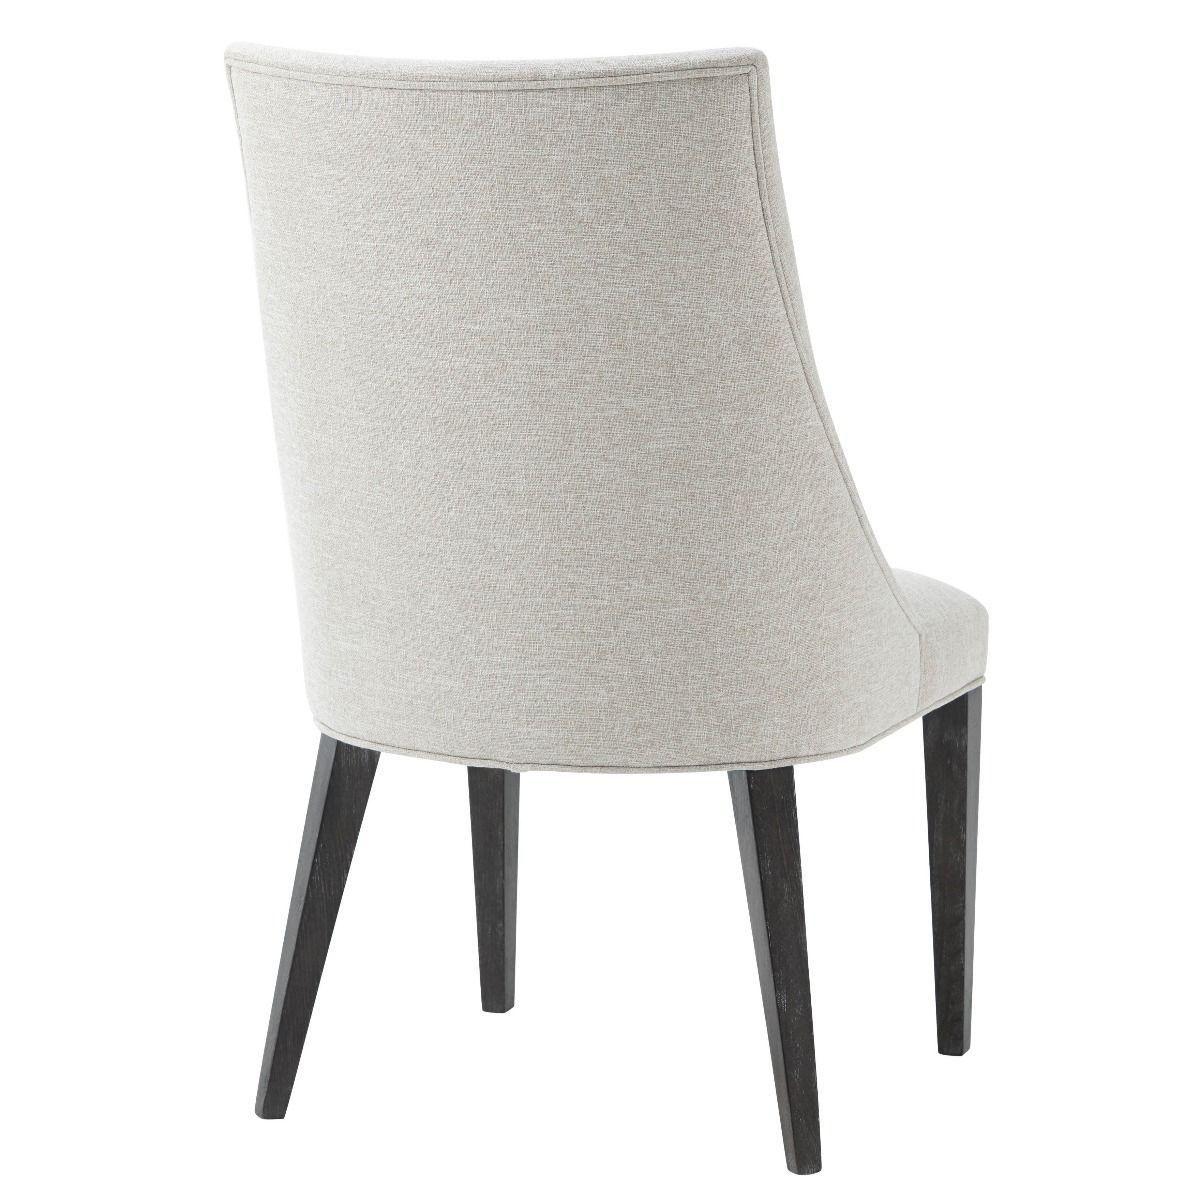 TA Studio Adele Neutral Dining Chair in Matrix Marble